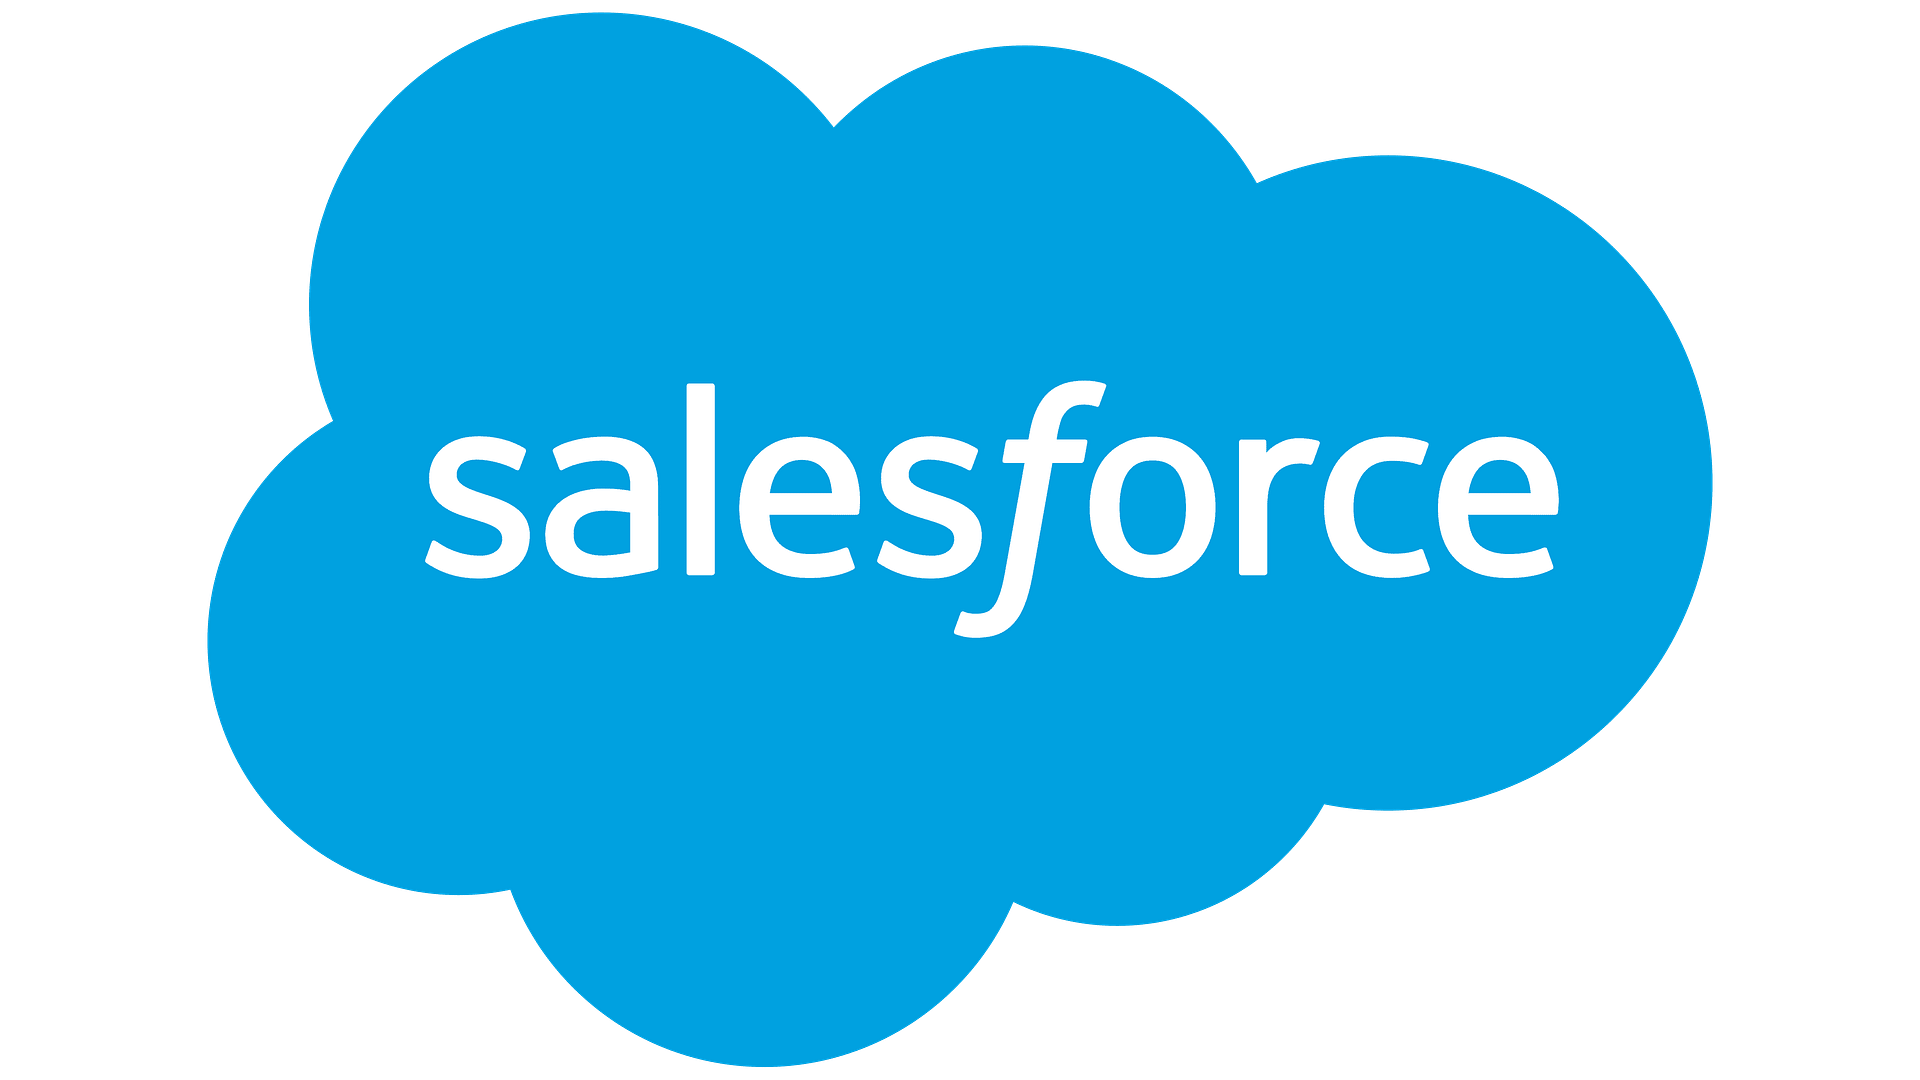 Salesforce, Inc. is an American cloud-based software company headquartered in San Francisco, California. It provides customer relationship management software and applications focused on sales, customer service, marketing automation, analytics, and application development.